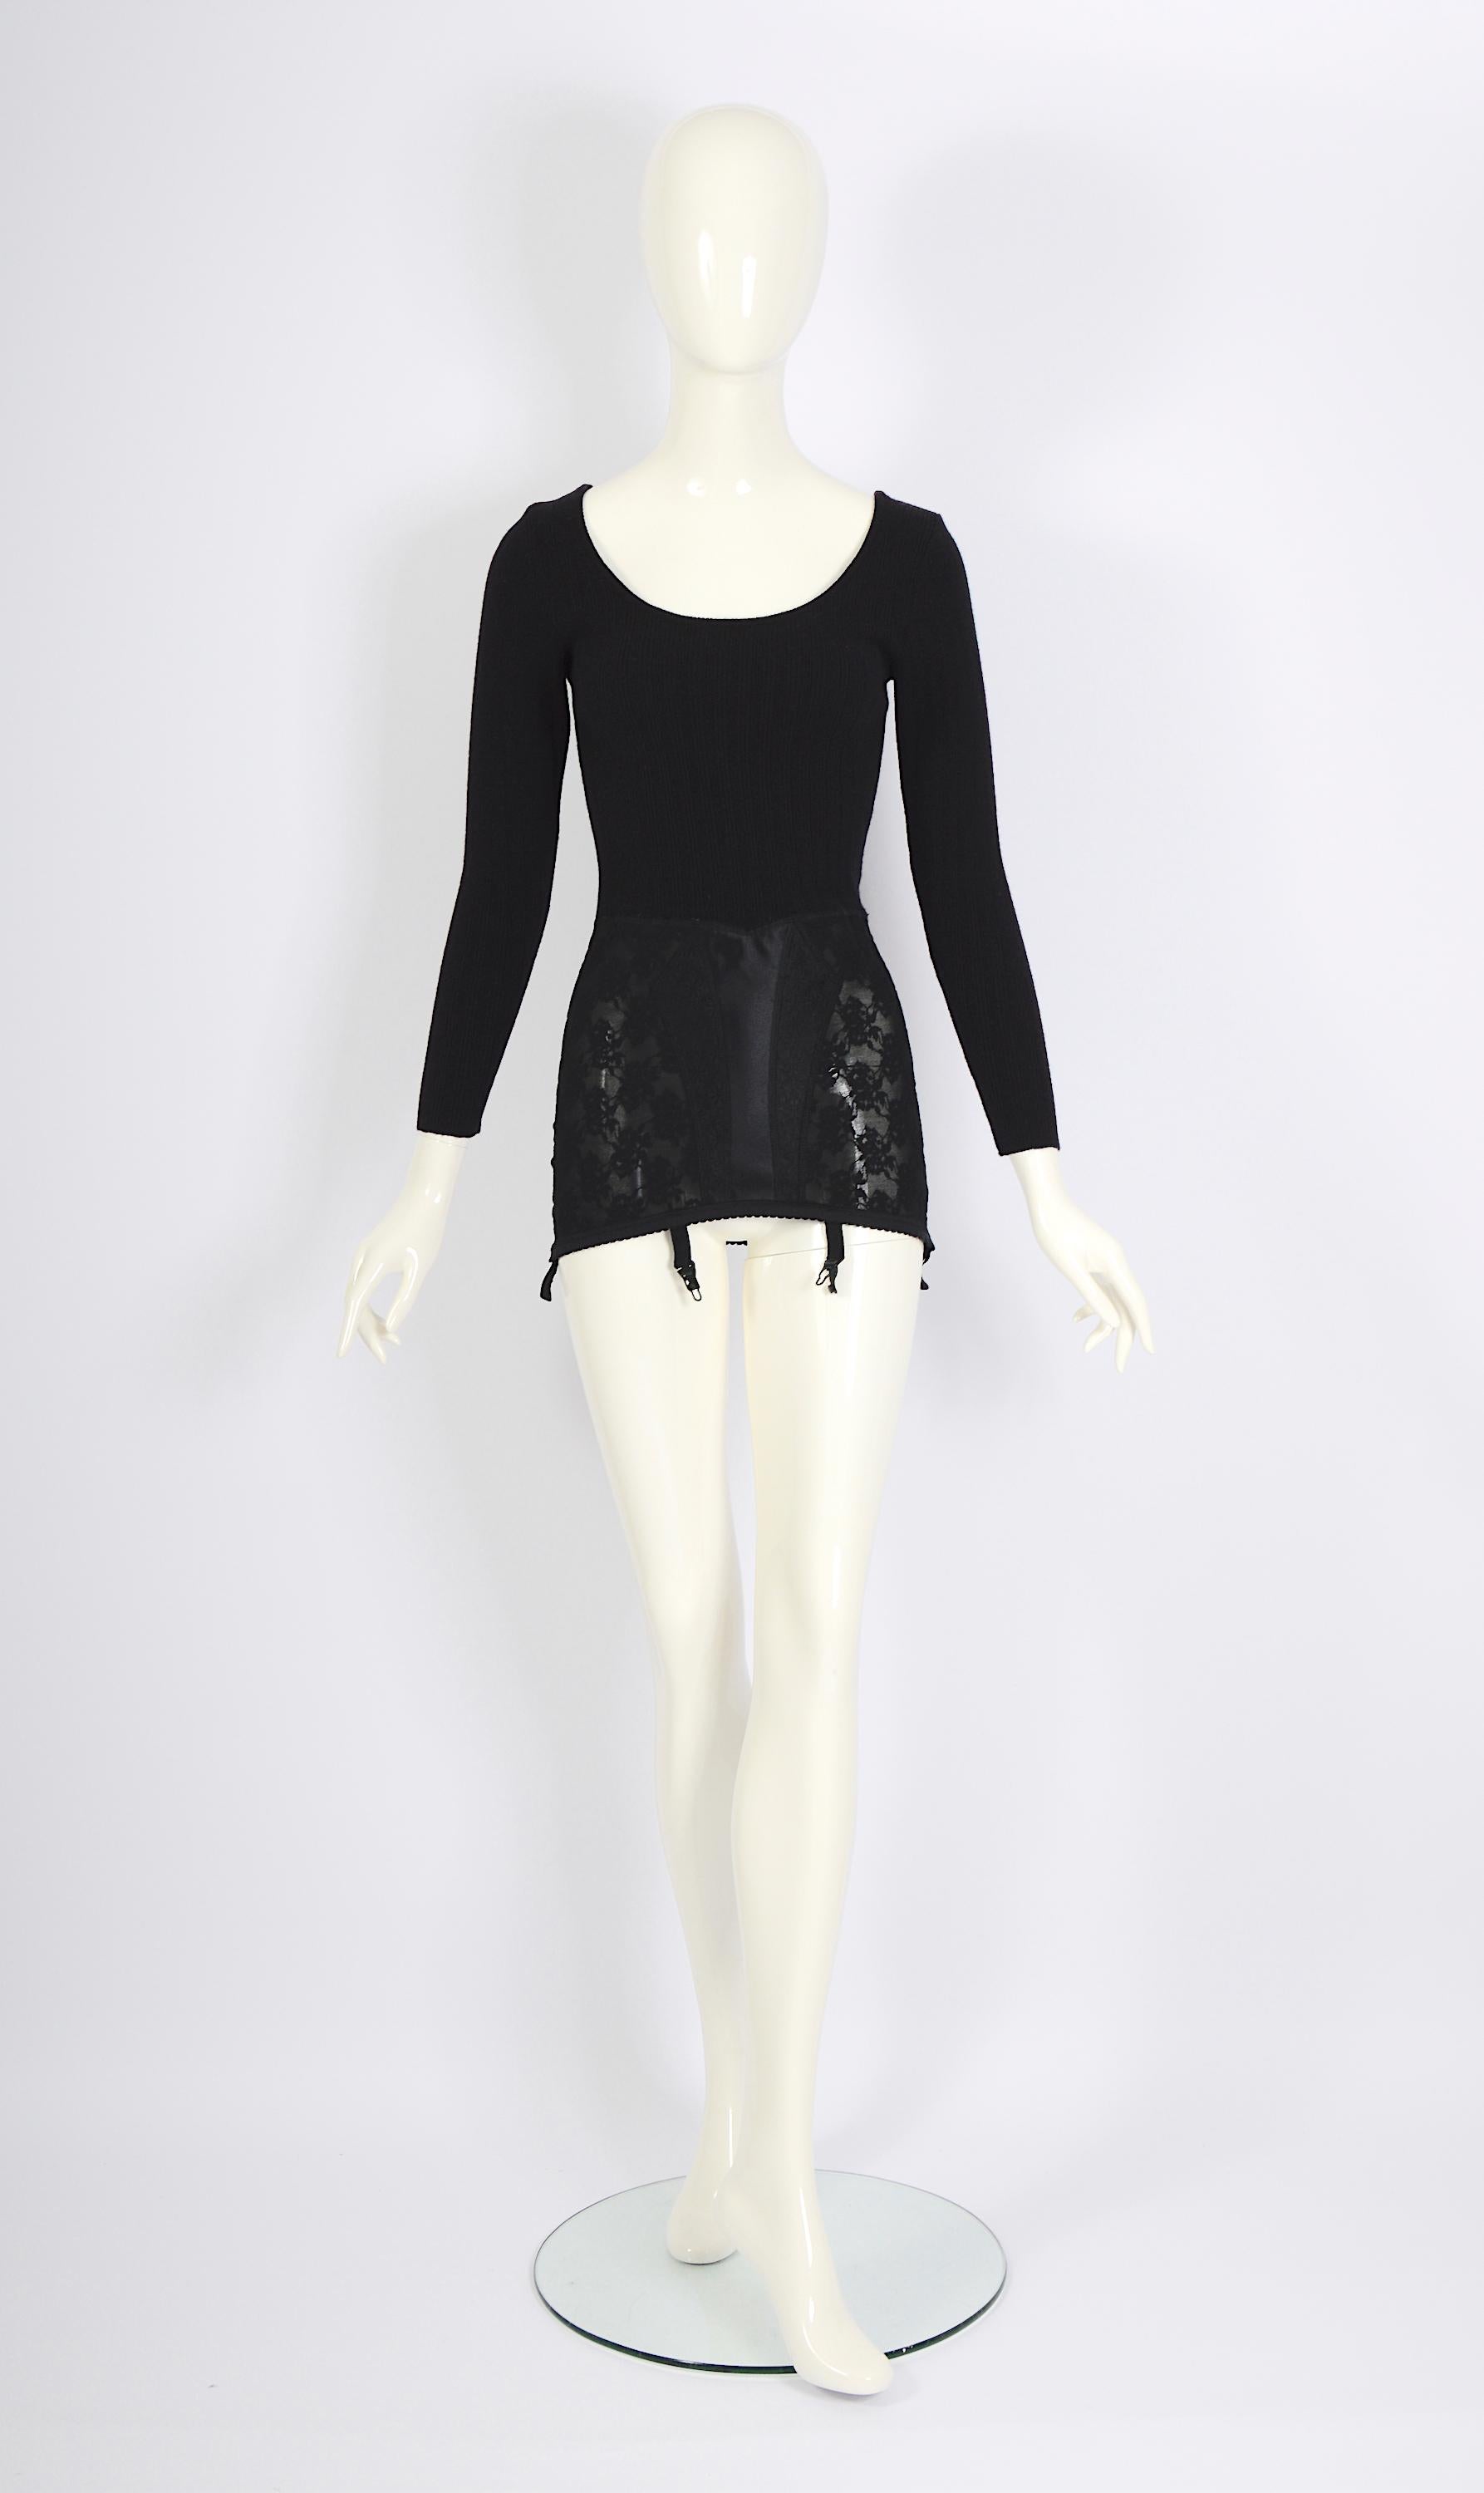 Gorgeous collectors archival vintage 1980s Moschino by Franco Moschino micro mini dress or top, featuring a wooly top with an attached corset. Just throw on some black tights and stylish heels to complete the look. It's effortlessly chic and totally